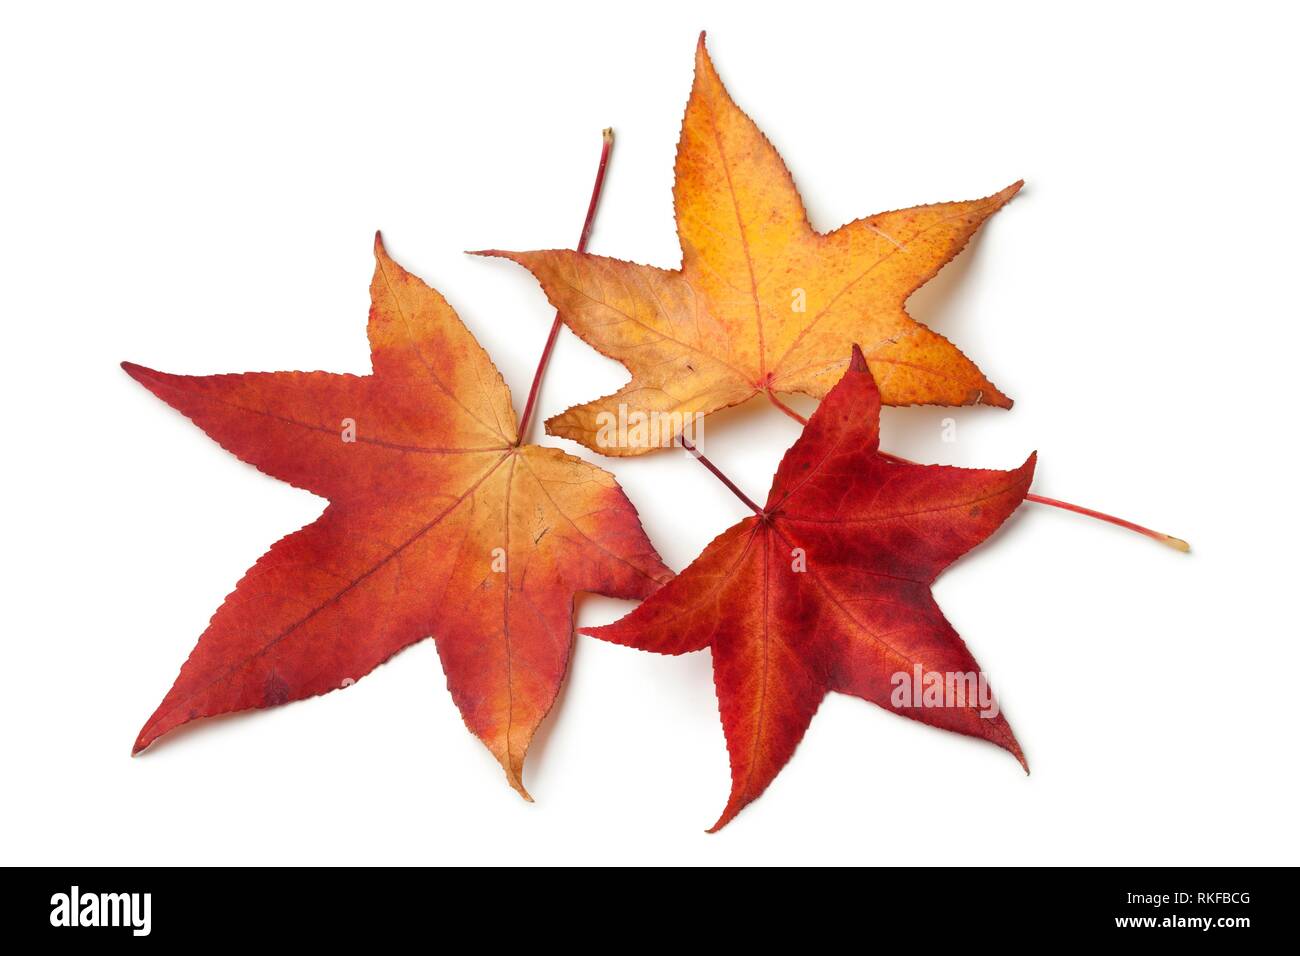 Red autumn leaves of an American sweetgum tree on white background. Stock Photo